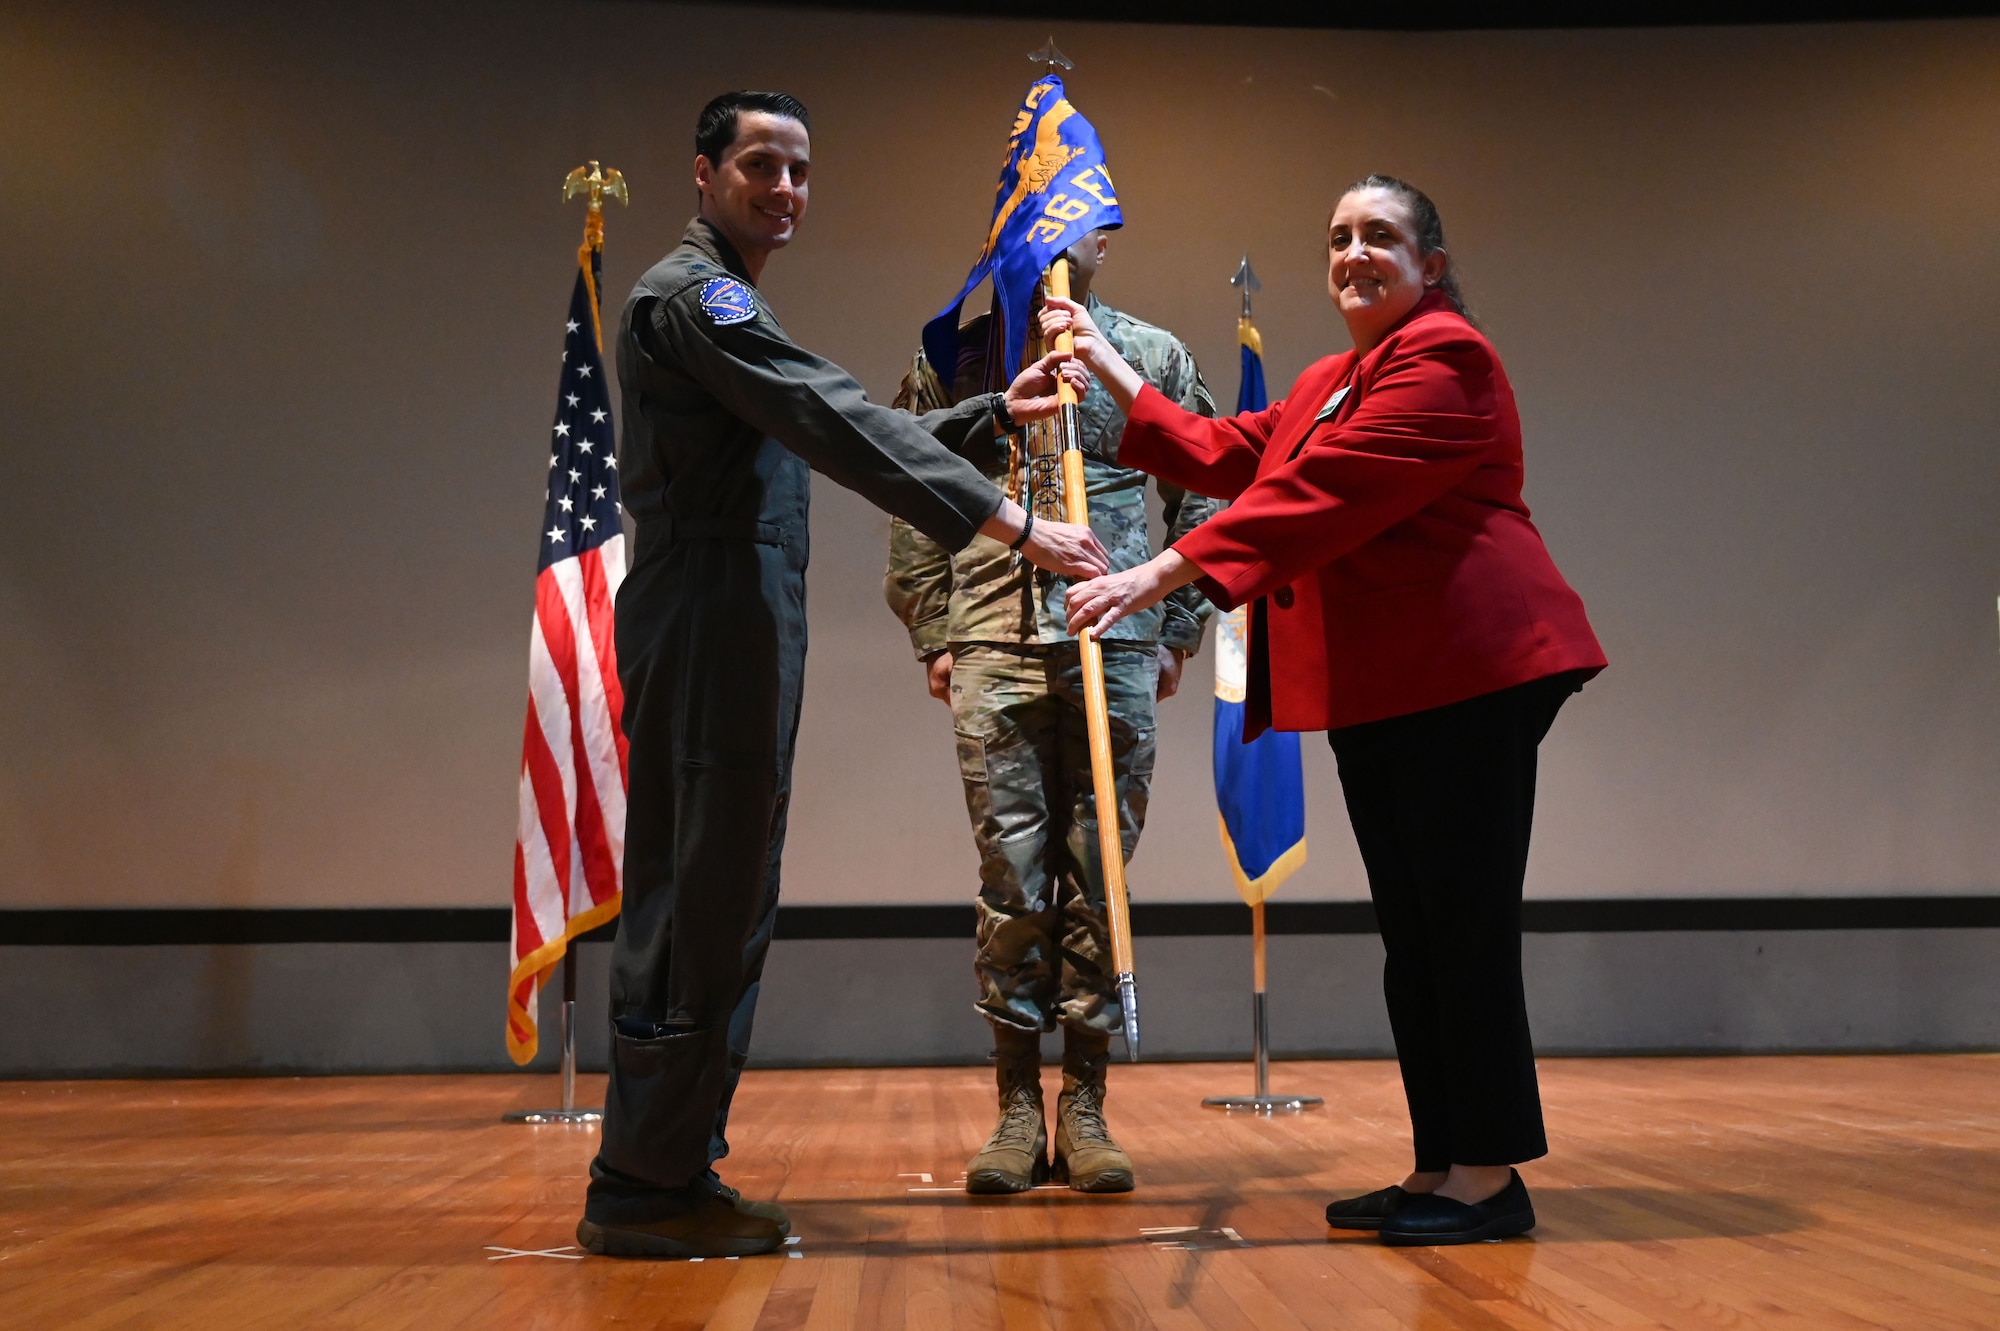 U.S. Air Force Lt. Col. David Criscione, 36th Electronic Warfare Squadron commander, inducts Maureen Bierman, Director of Marketing and External Affairs for Step One Automotive Group and serves as the Chairperson of The board of directors of the Greater Fort Walton Beach Chamber of Commerce, during the wing’s first Honorary Commander Induction ceremony, at Eglin Air Force Base, Fla., Dec. 1, 2023. Honorary Commanders serve as the liaison between the 350th Spectrum Warfare Wing and the surrounding community by maintaining strong relations through mutually beneficial professional partnership. (U.S. Air Force photo by Staff Sgt. Ericka A. Woolever)